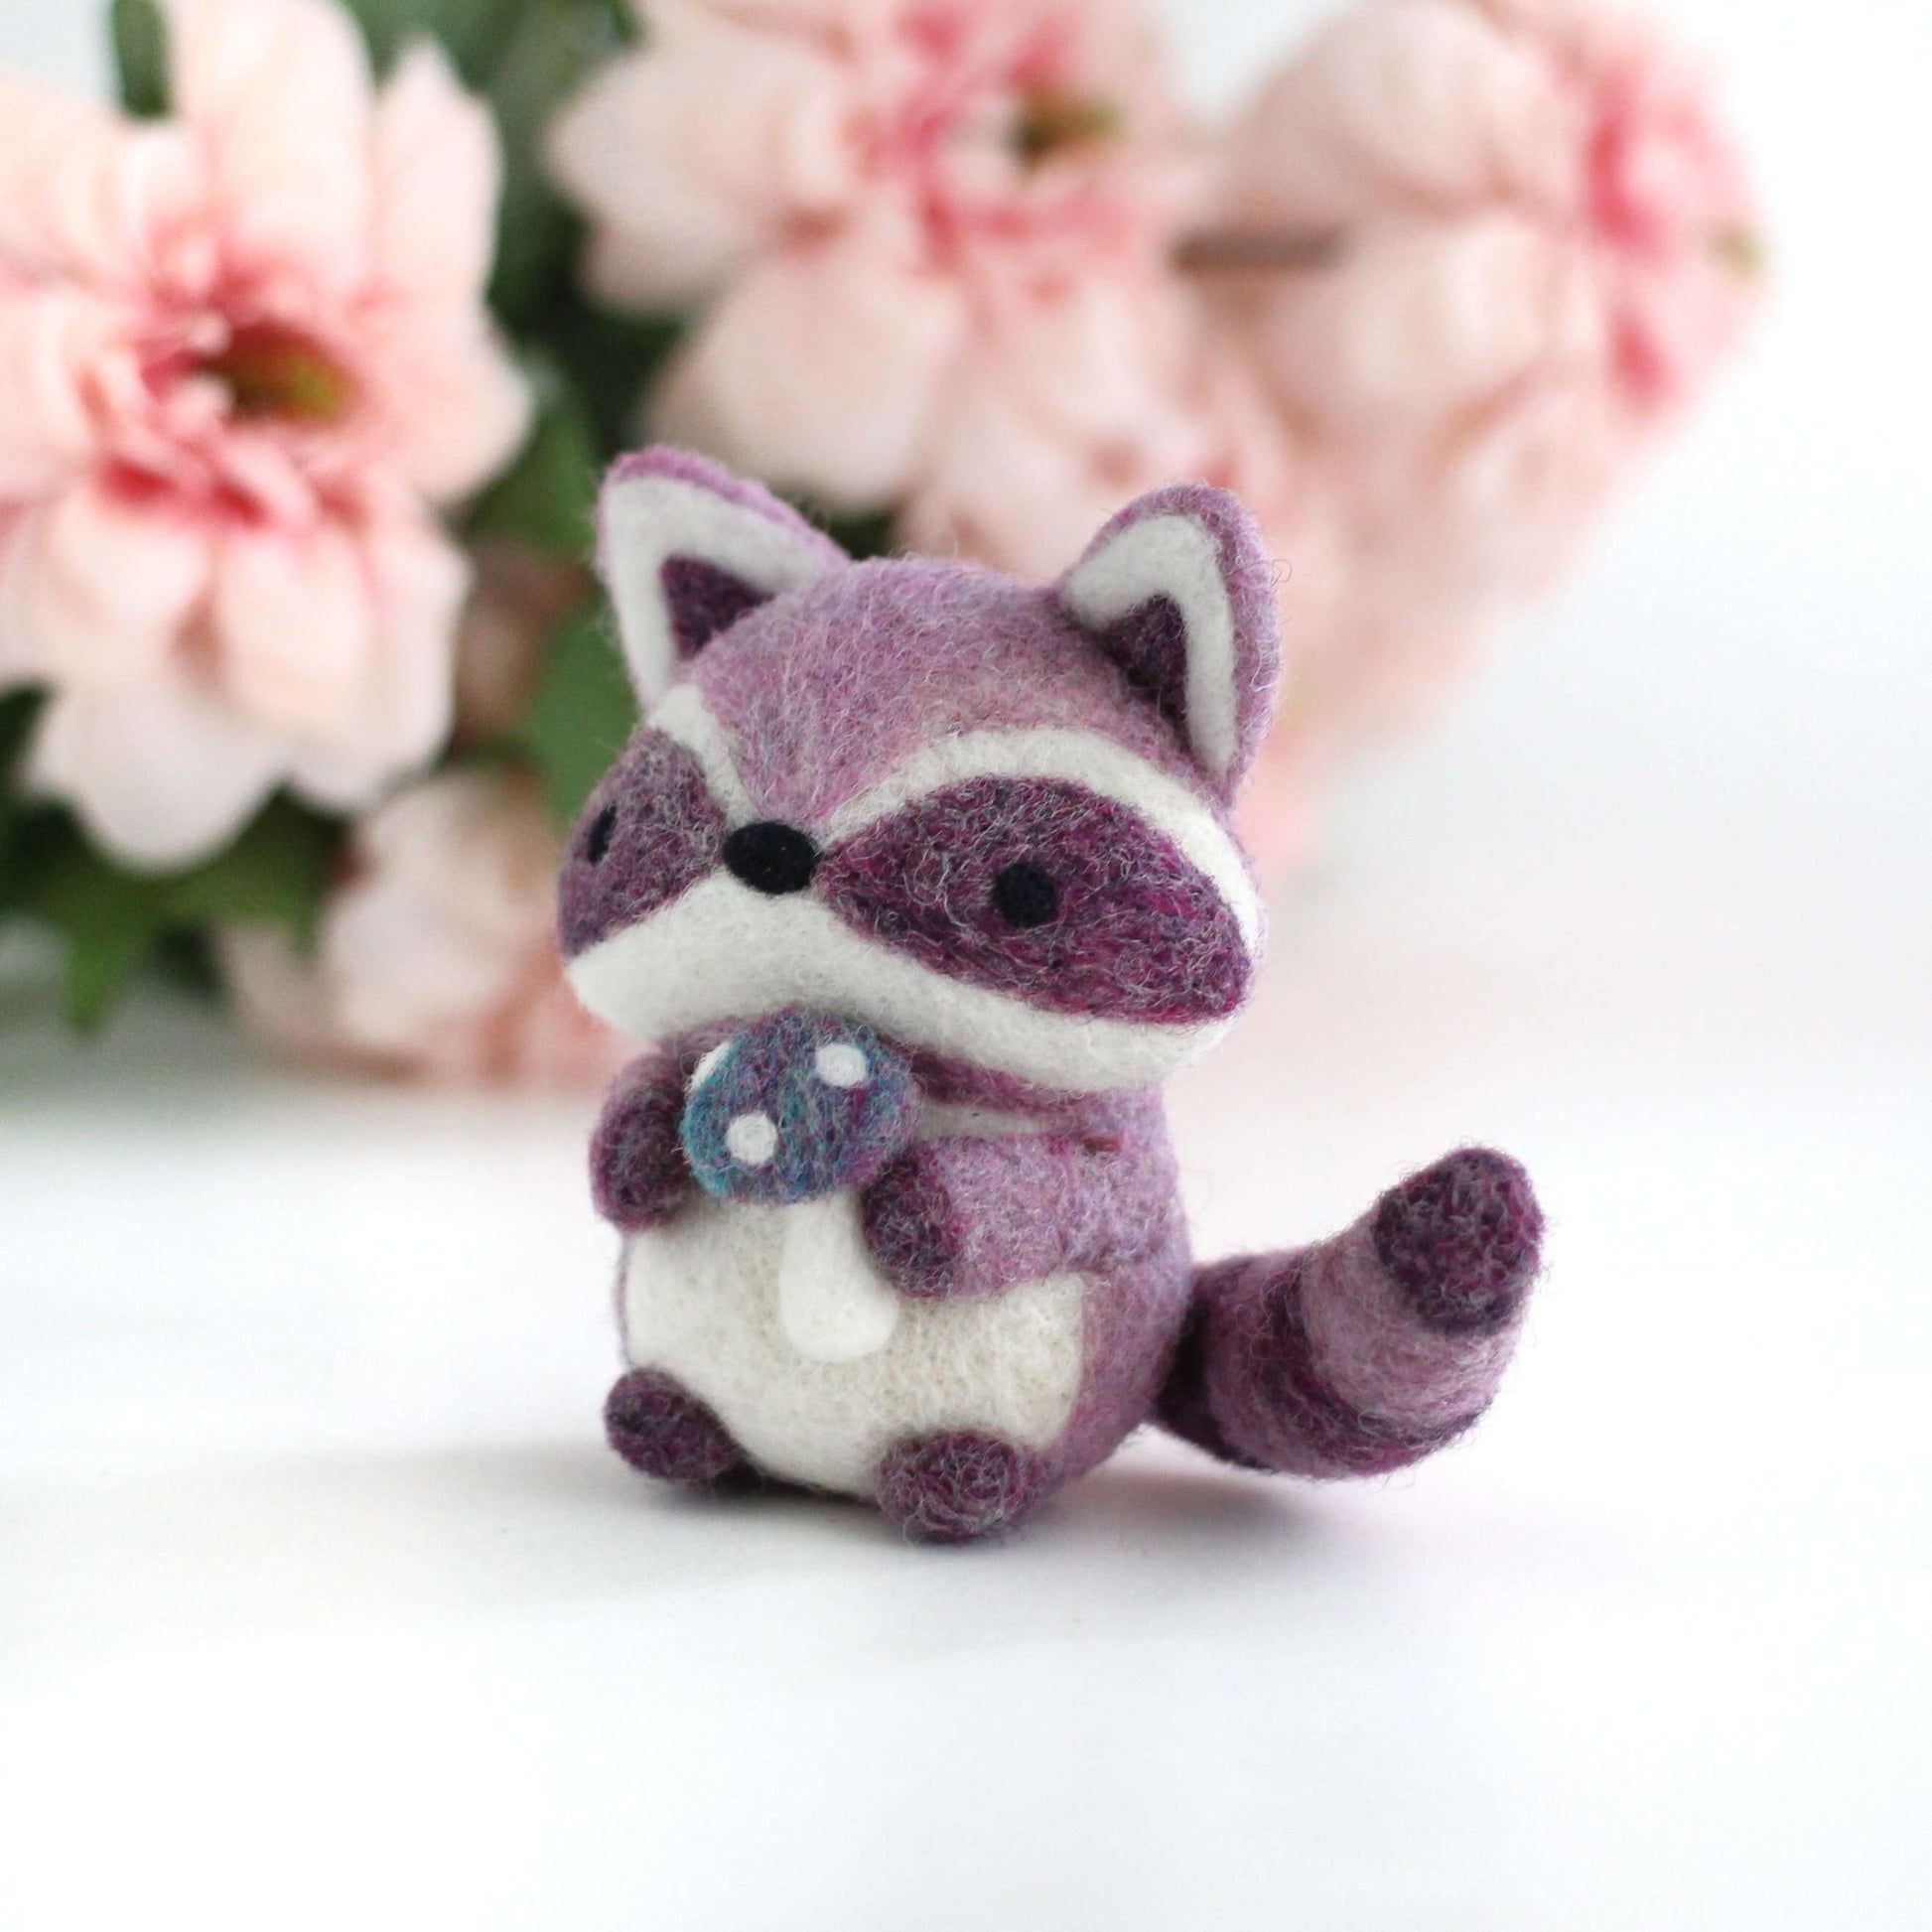 Needle Felted Purple Raccoon with Magical Mushroom by Wild Whimsy Woolies